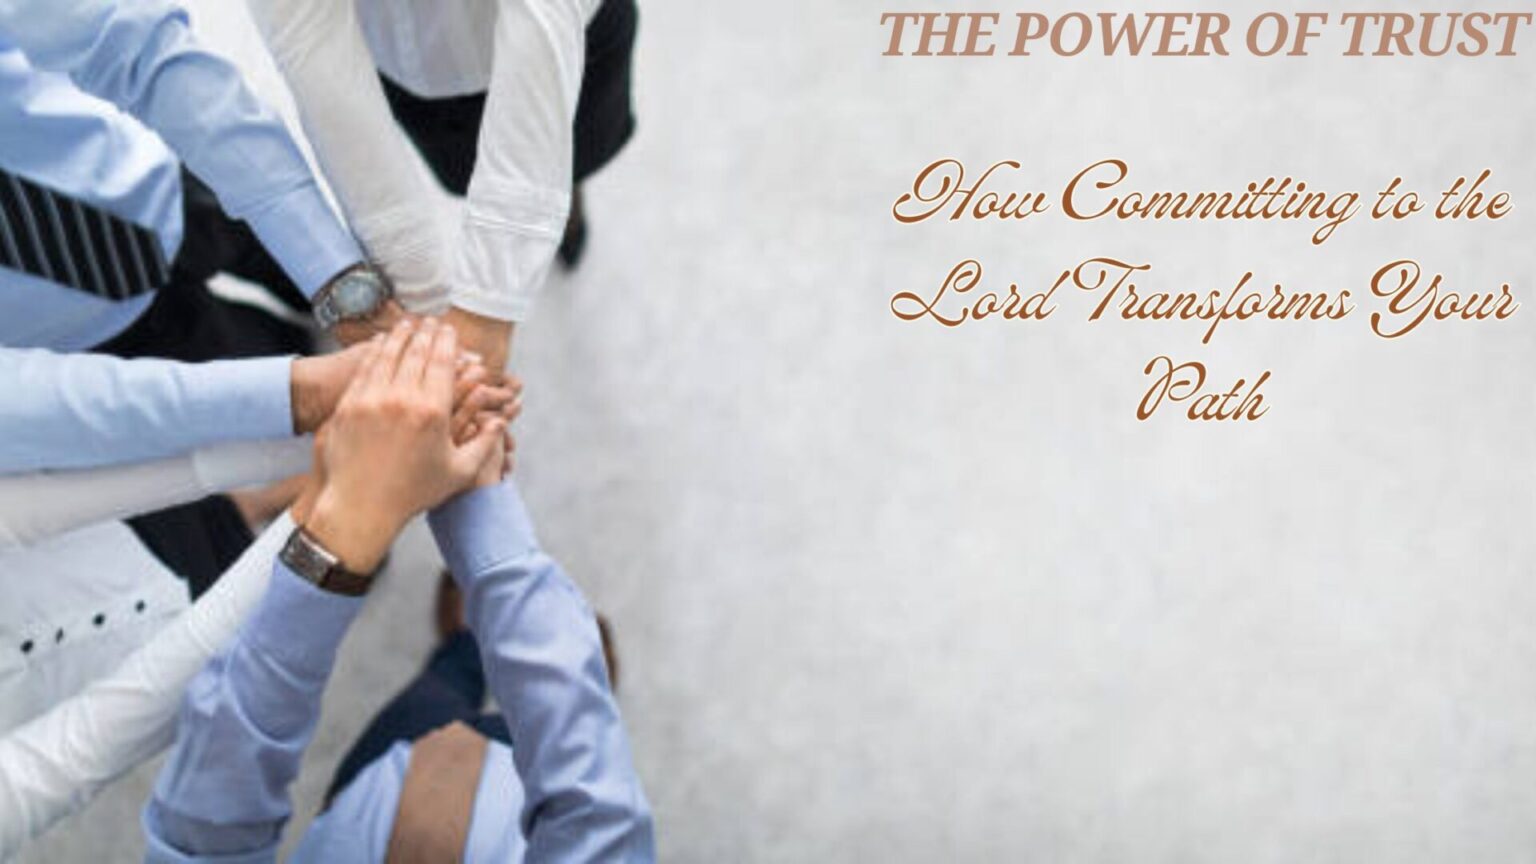 The Power of Trust: How Committing to the Lord Transforms Your Path